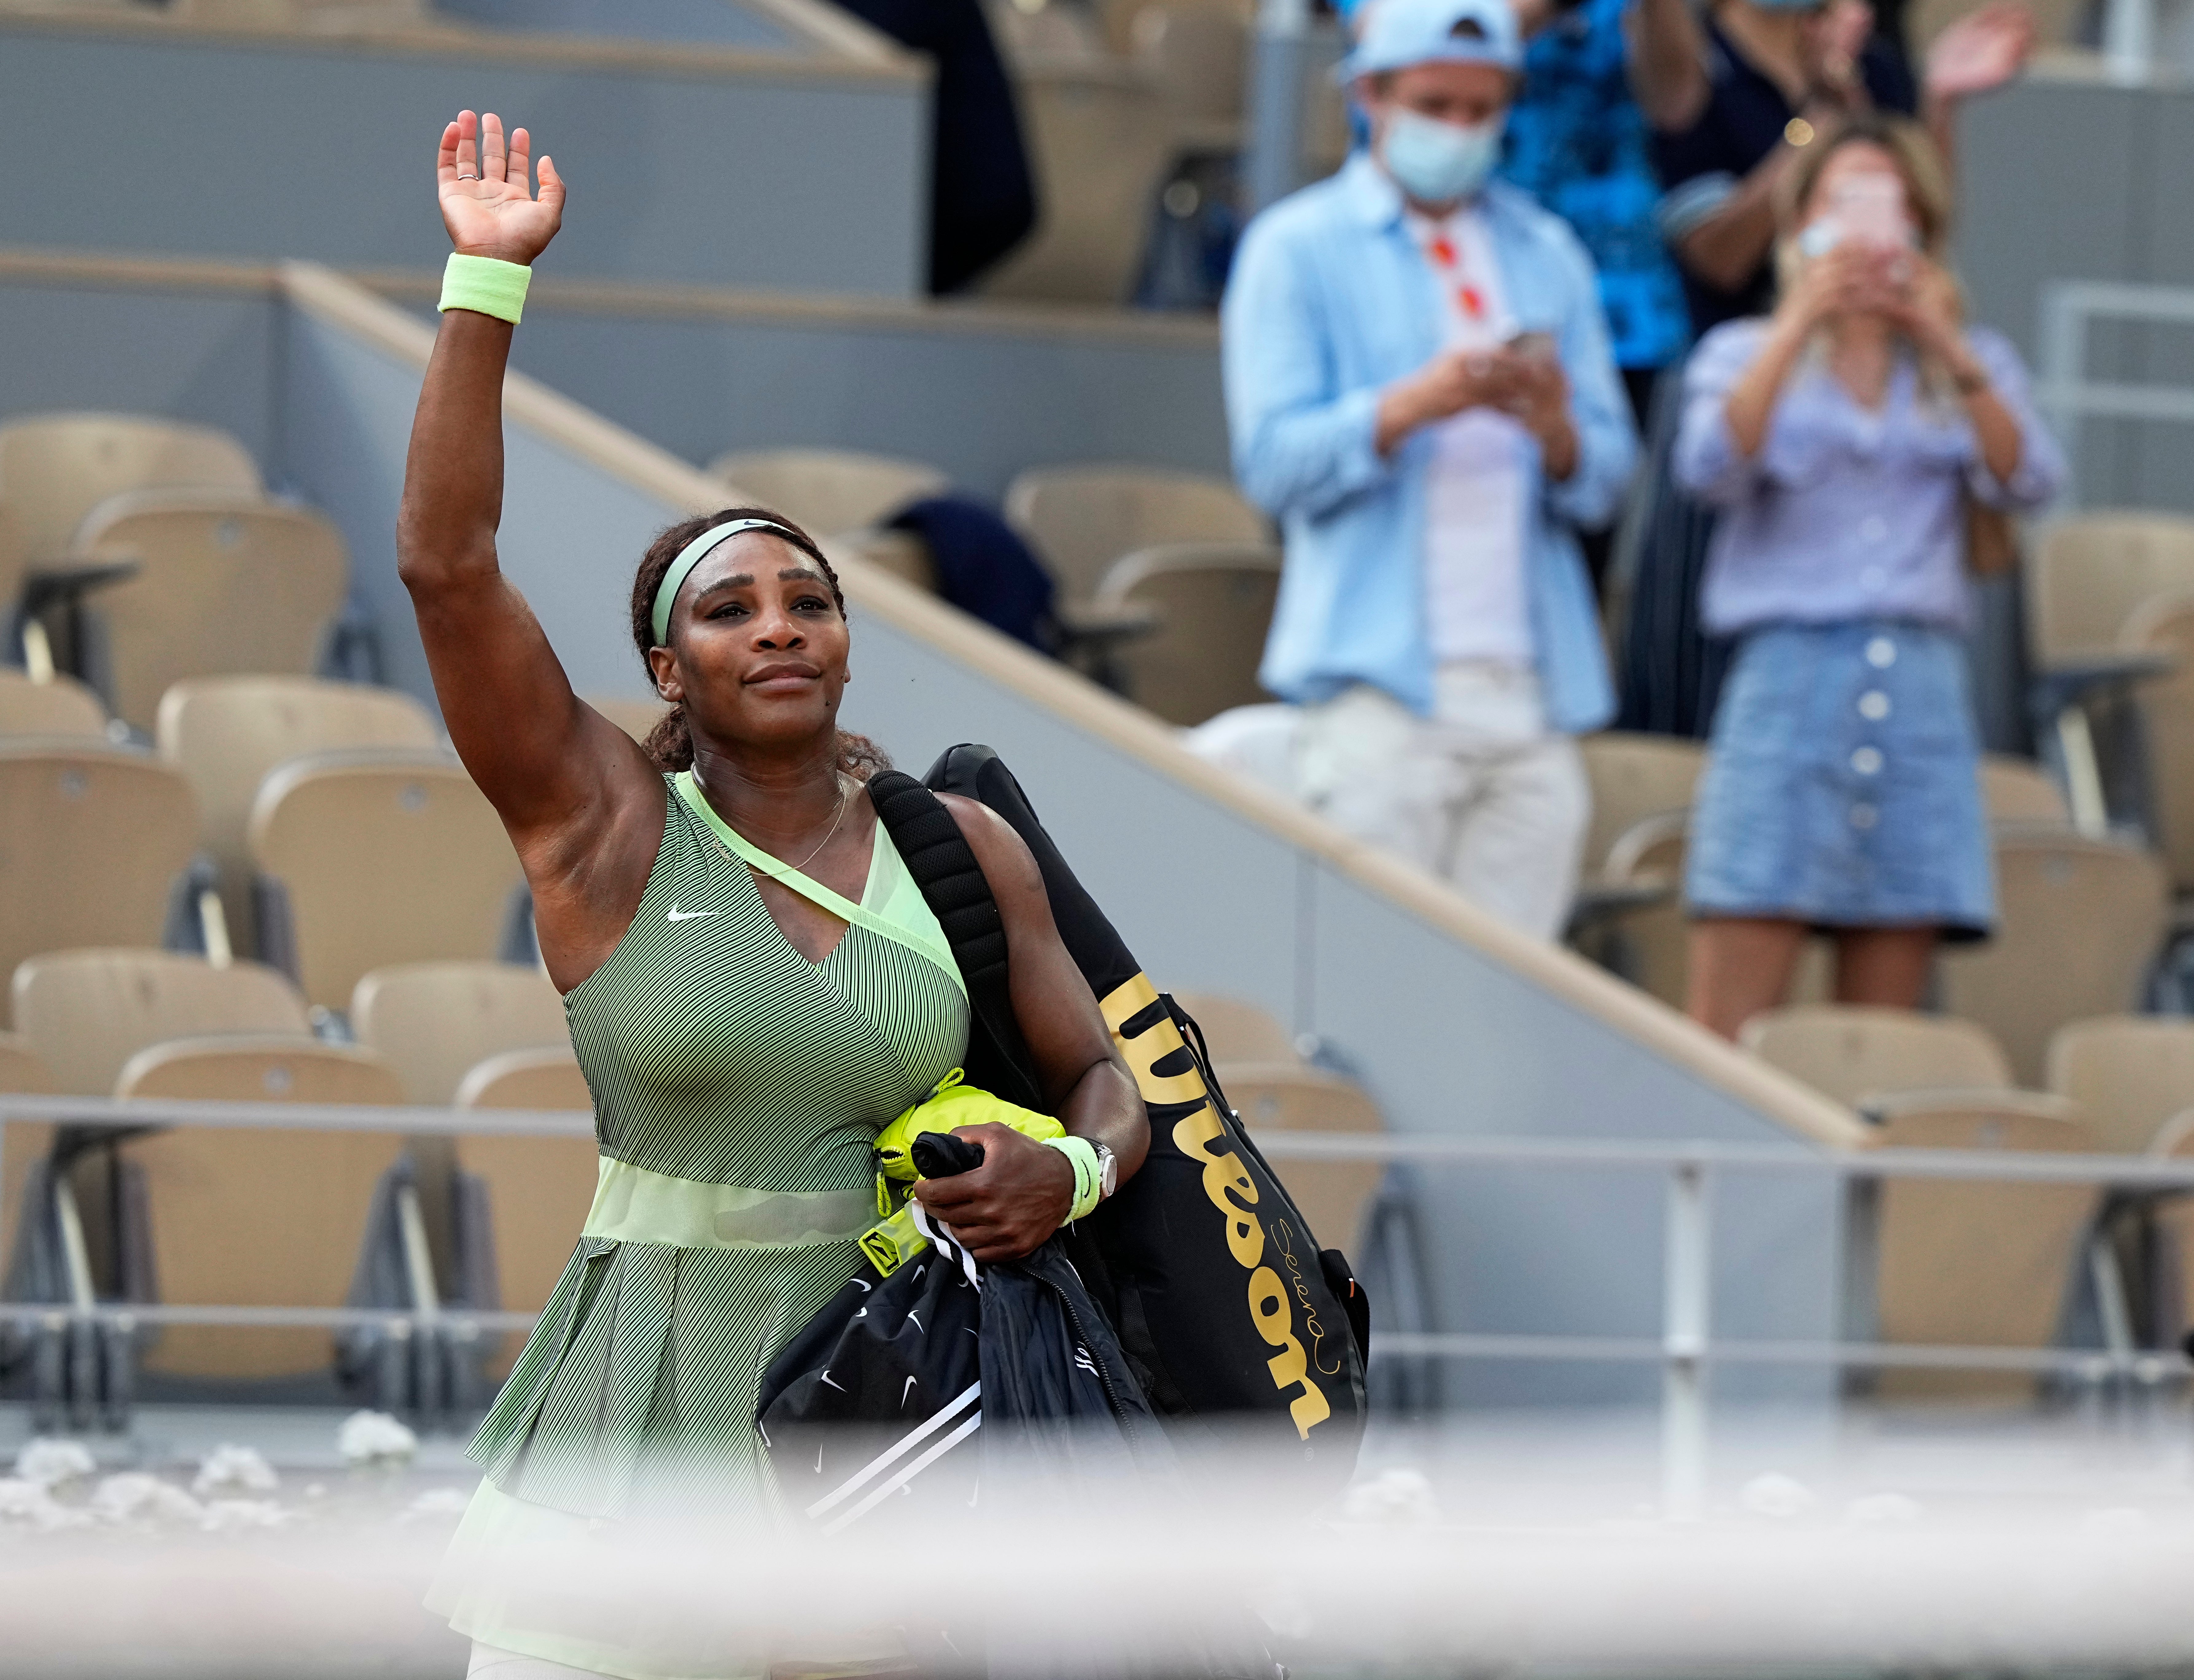 Serena Williams waves to the crowd following her loss to Elena Rybakina